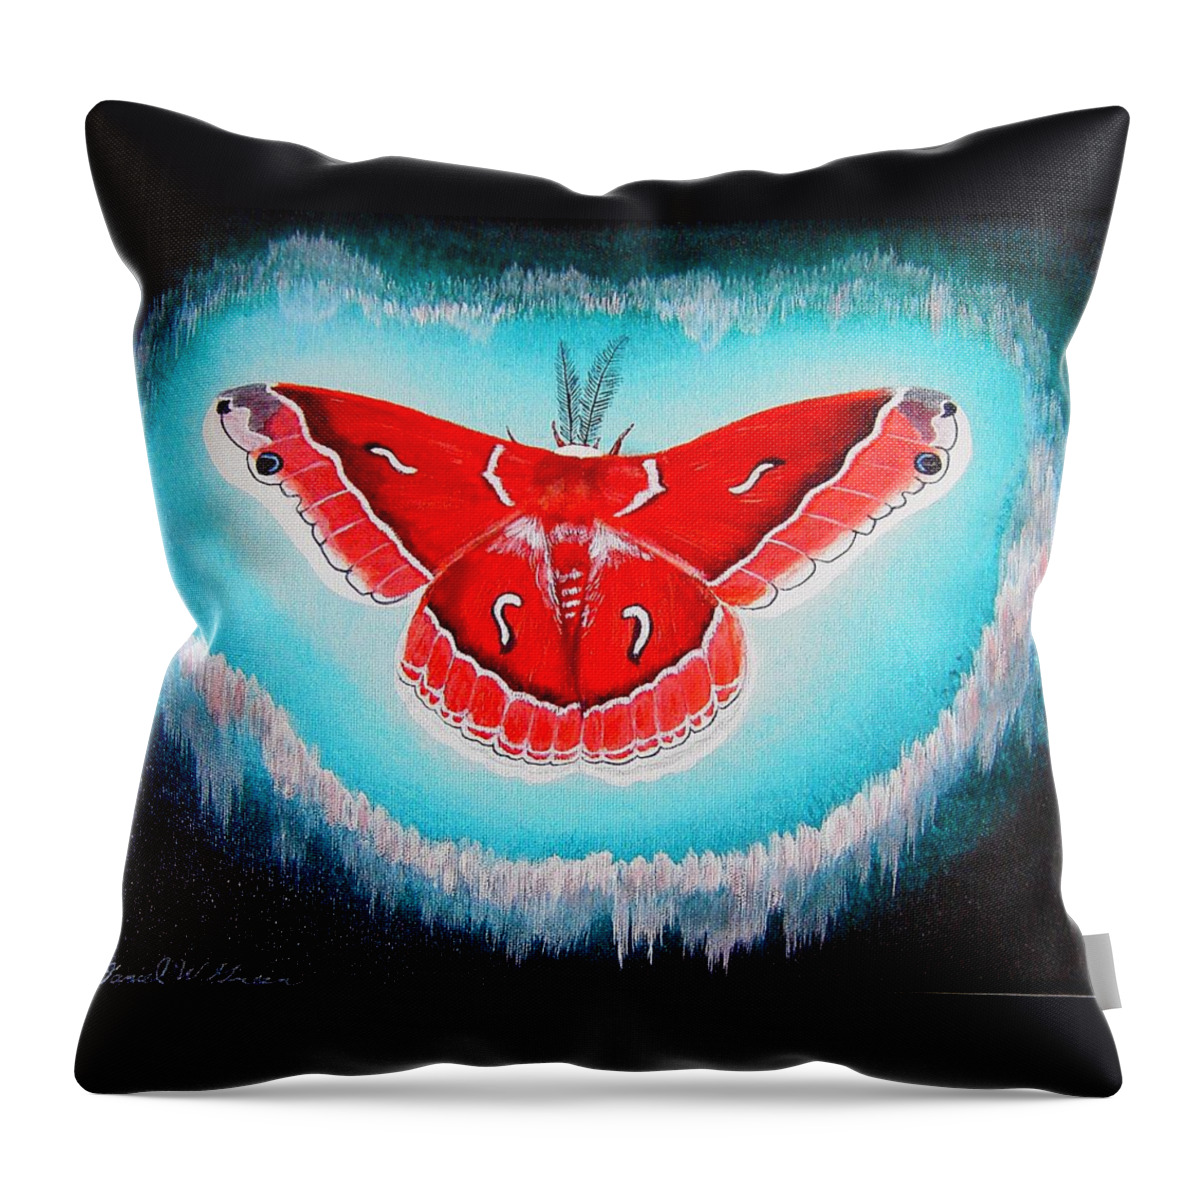 Butterfly Throw Pillow featuring the painting Pink Circropia Moth by Daniel W Green